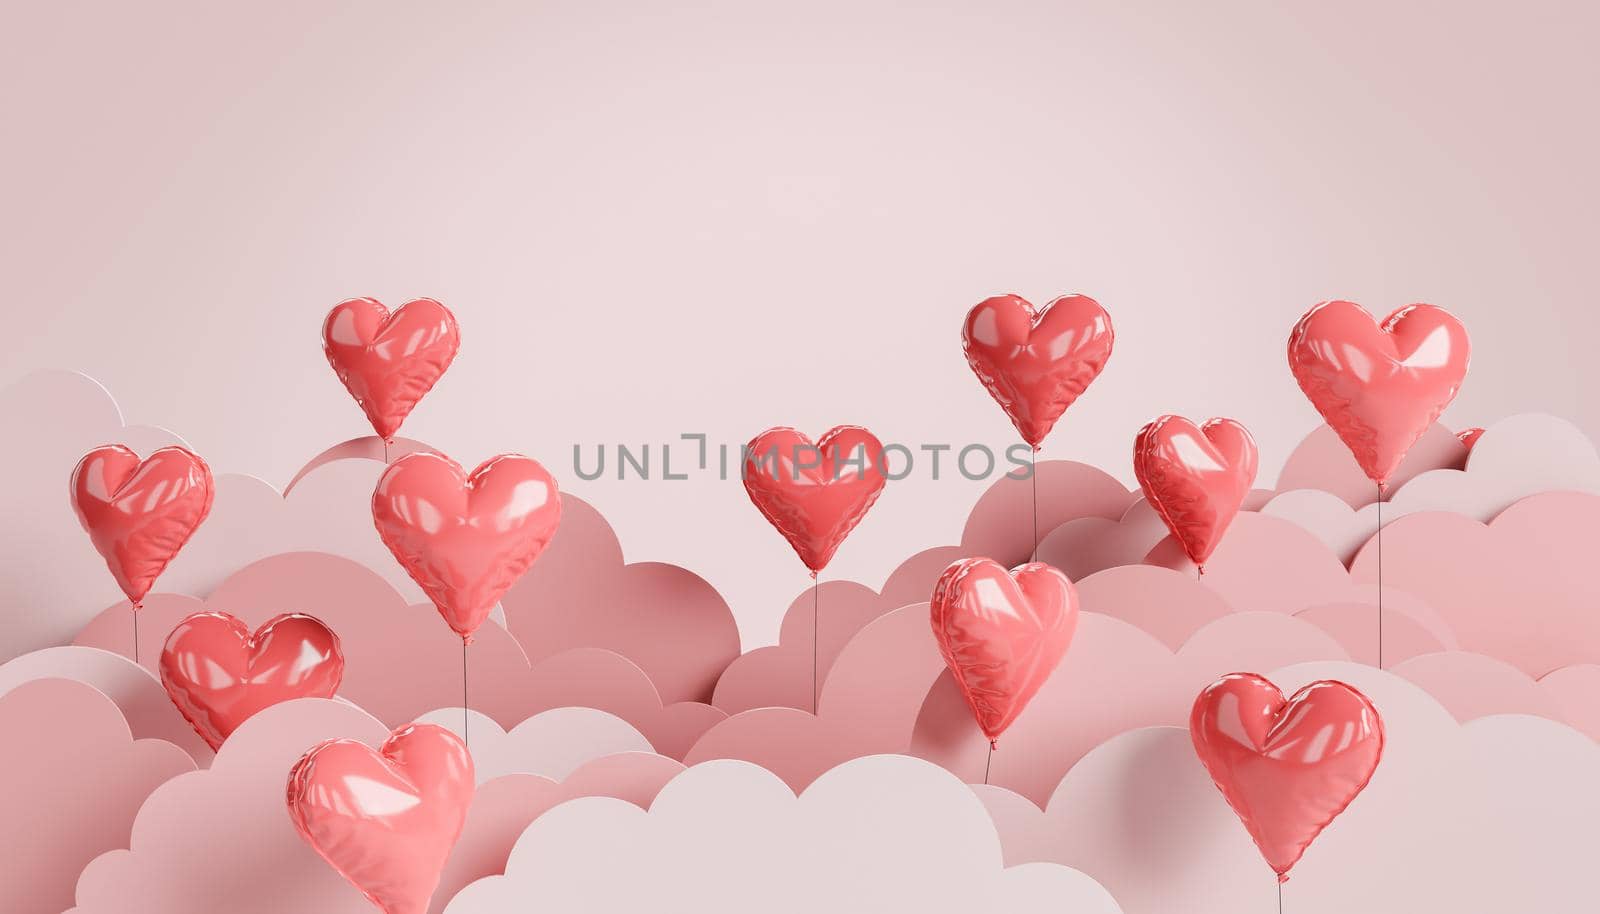 background of heart shaped balloons between flat clouds by asolano